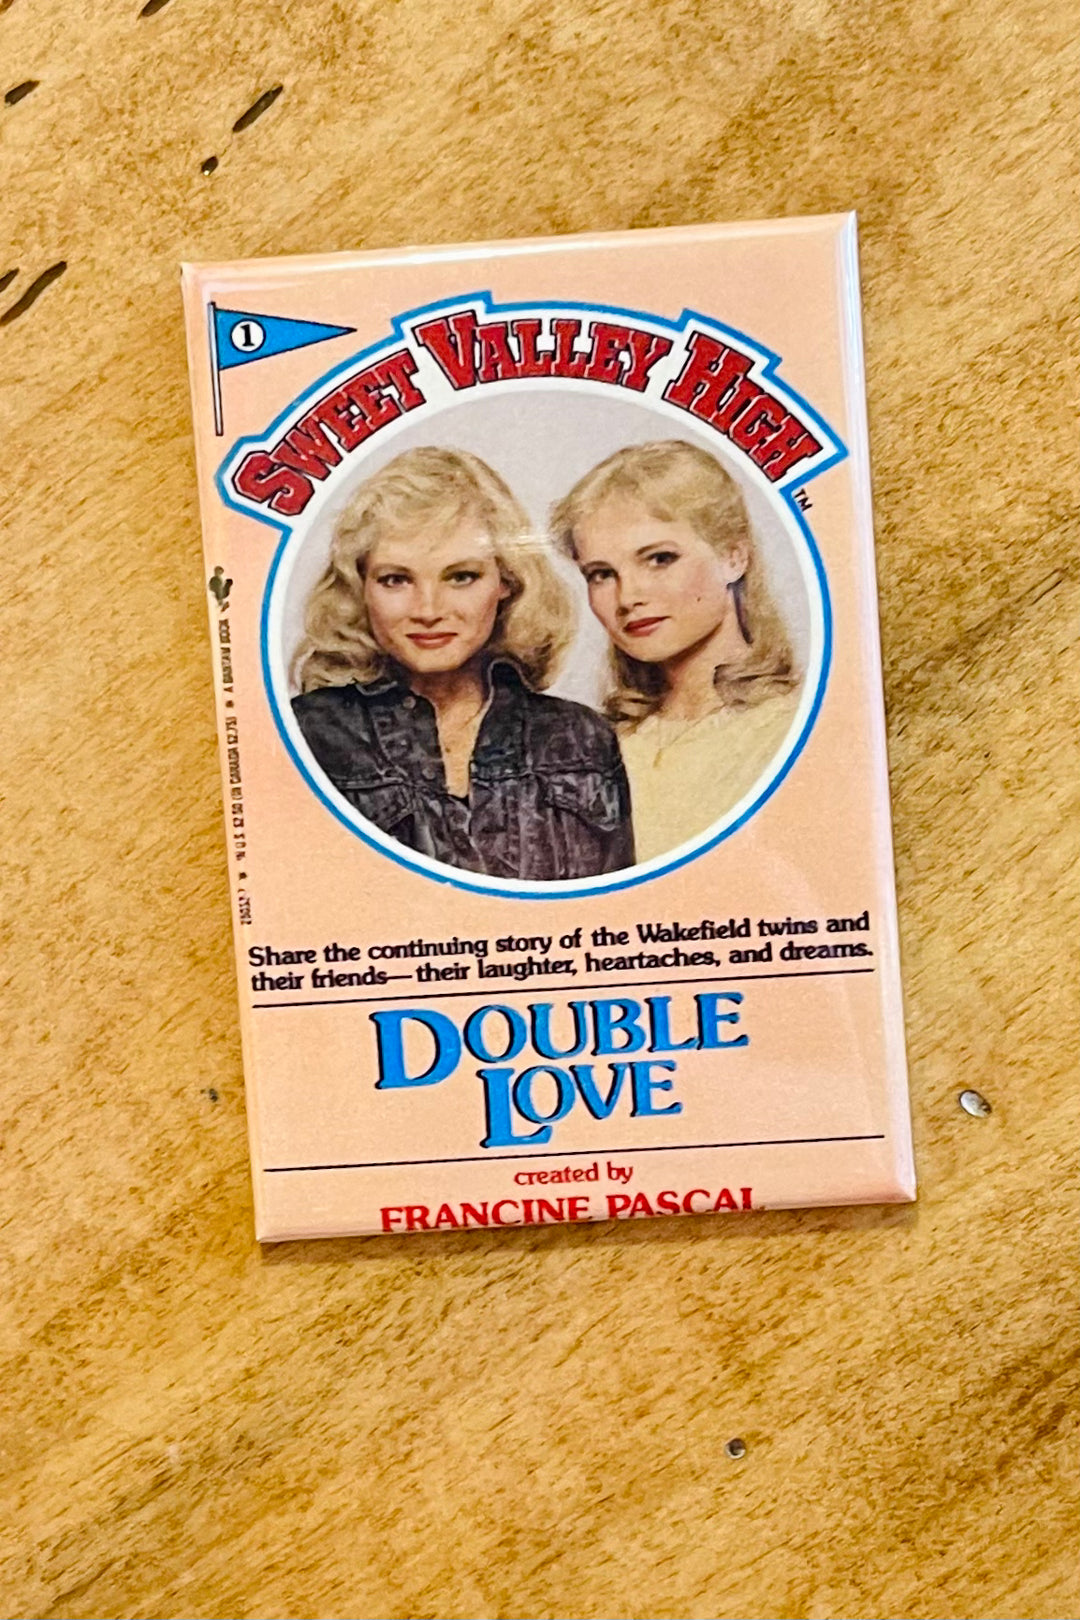 MAGNET: Sweet Valley High - Double Love